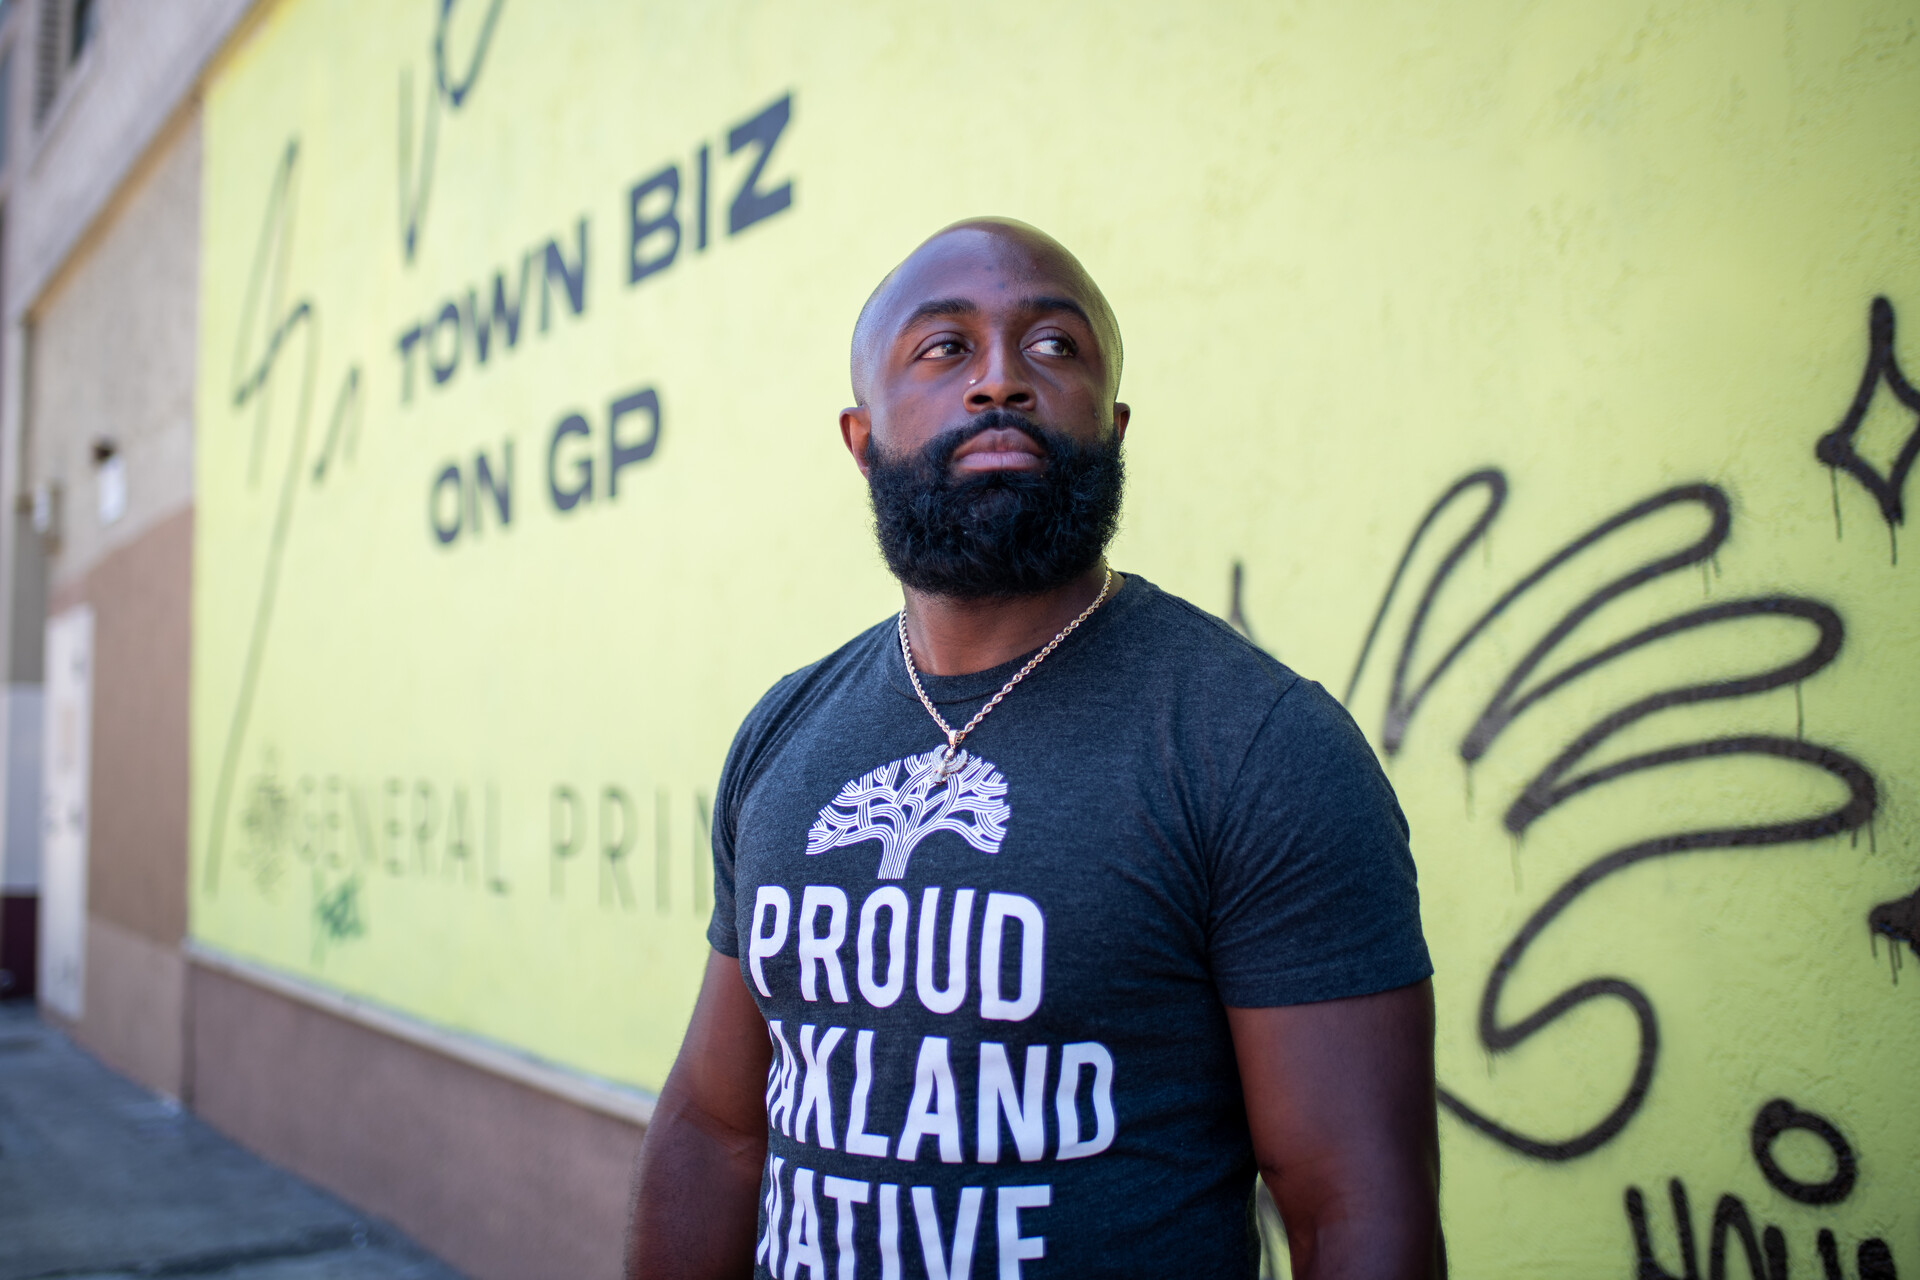  Stefon Dent sports a beard and wears his Proud Oakland Native shirt as he stars into the distance on a street in downtown Oakland. Behind him is a yellow wall with artist's tags in black paint on it.